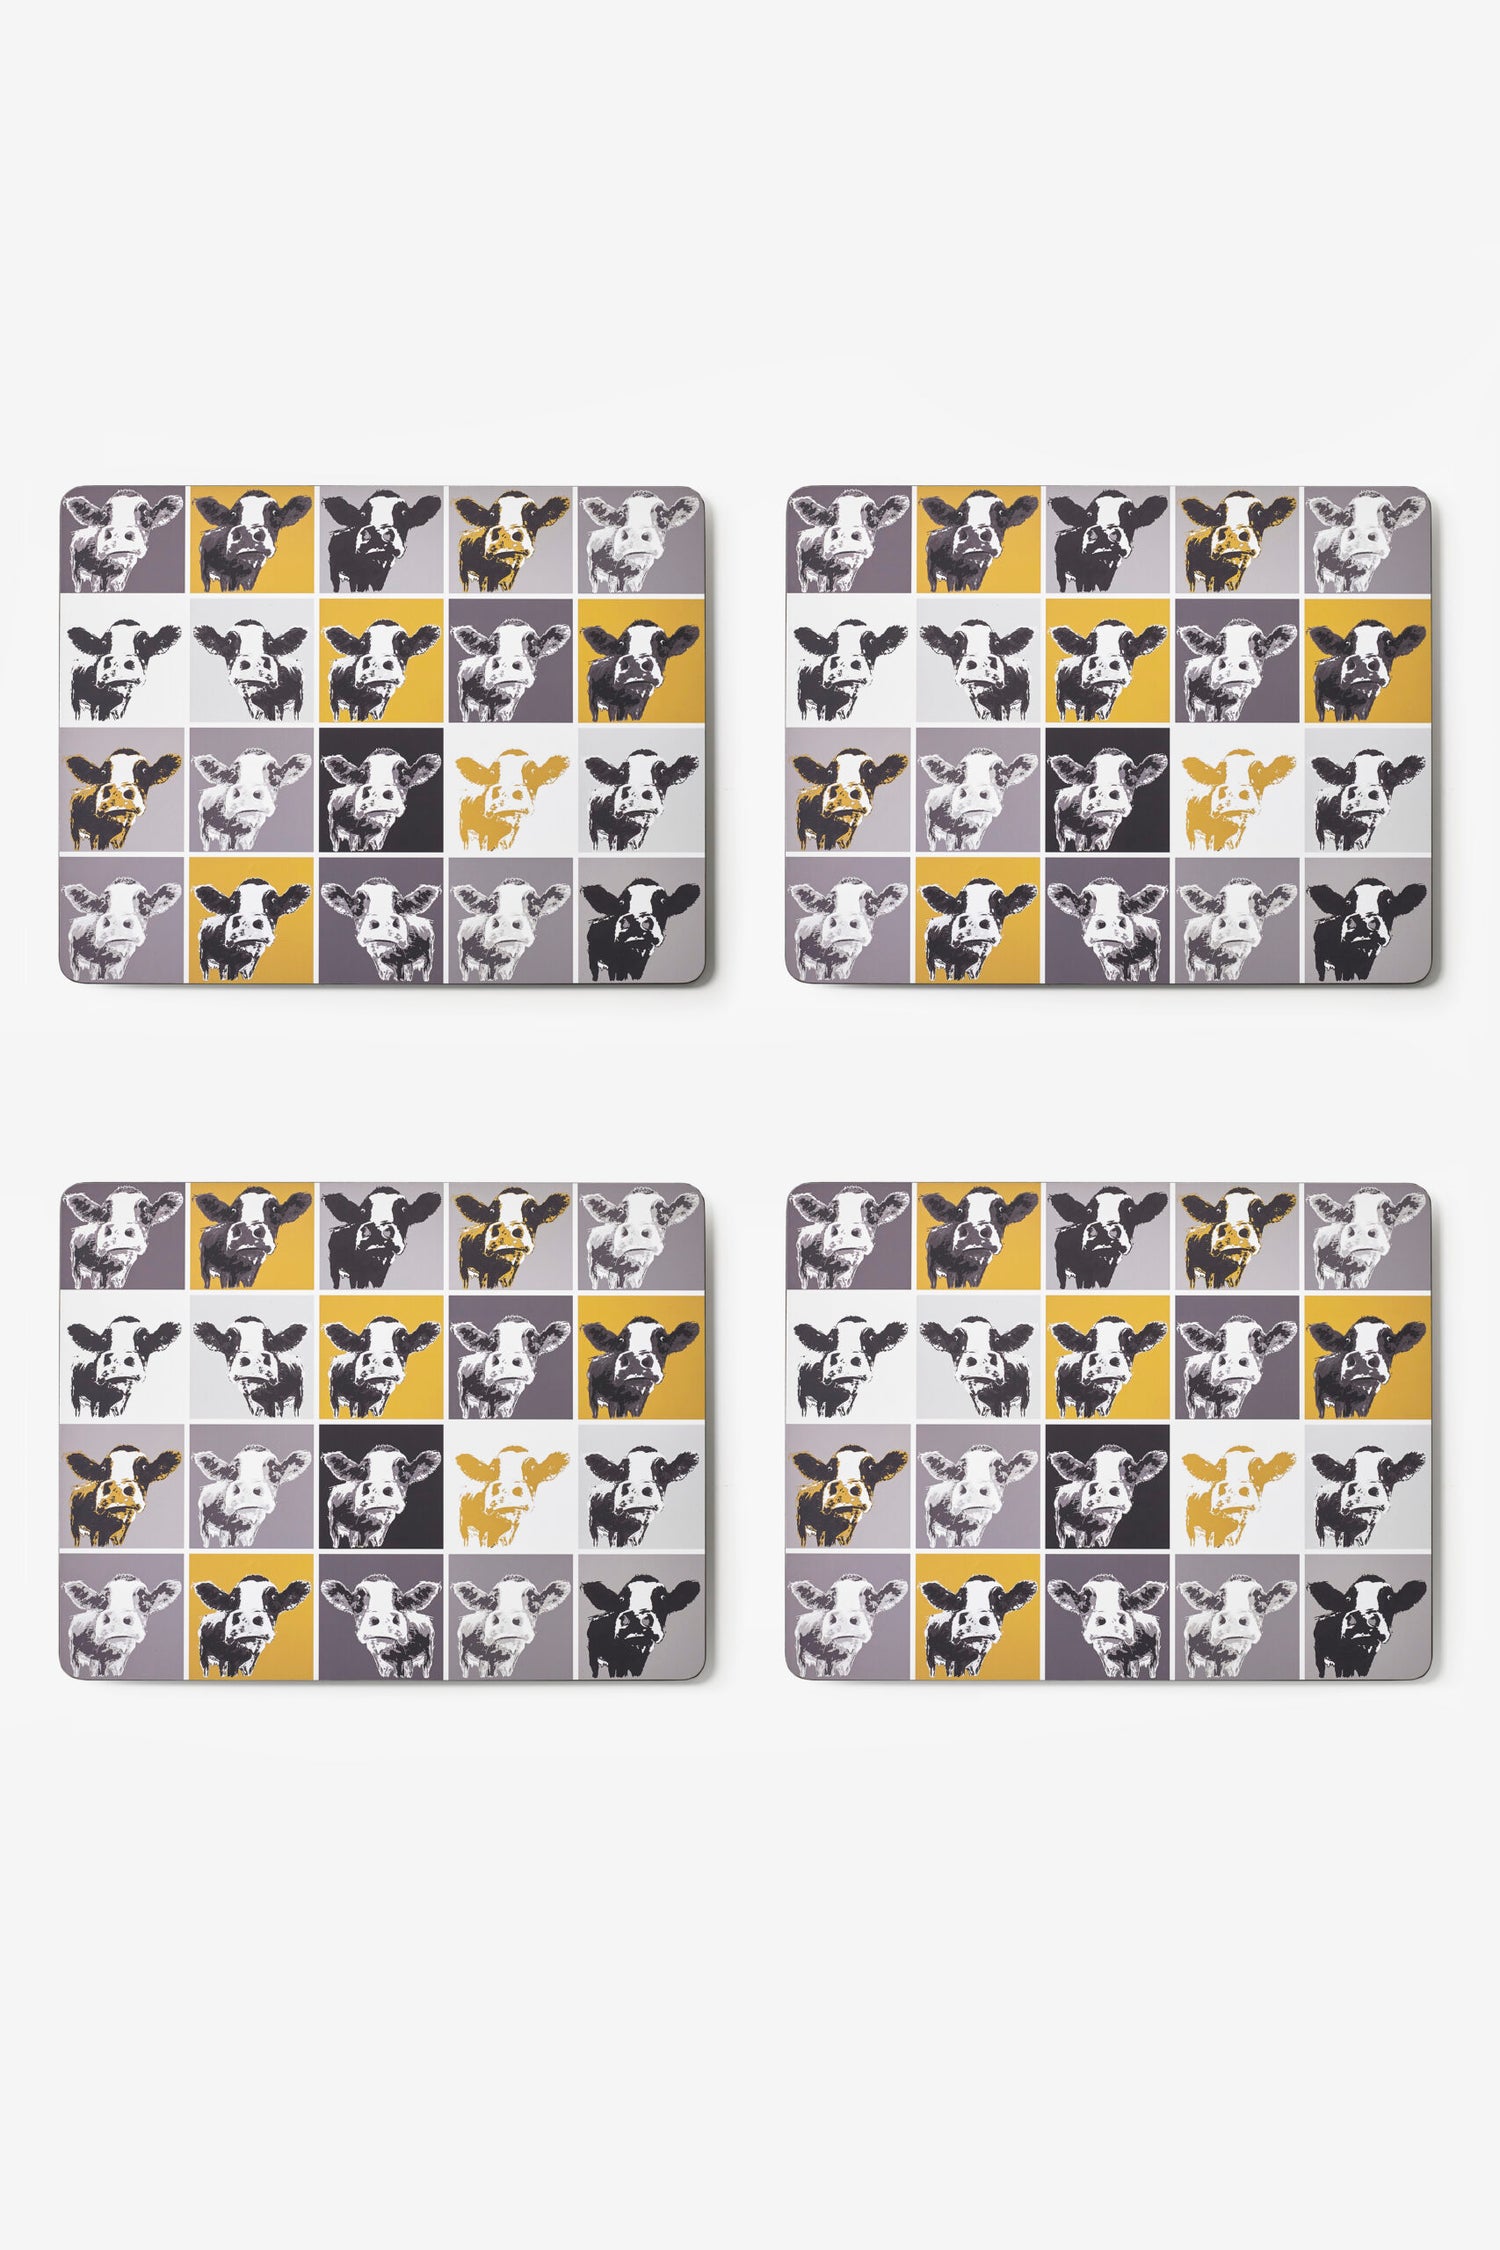 MM Sketch Moo Placemats Set of 4